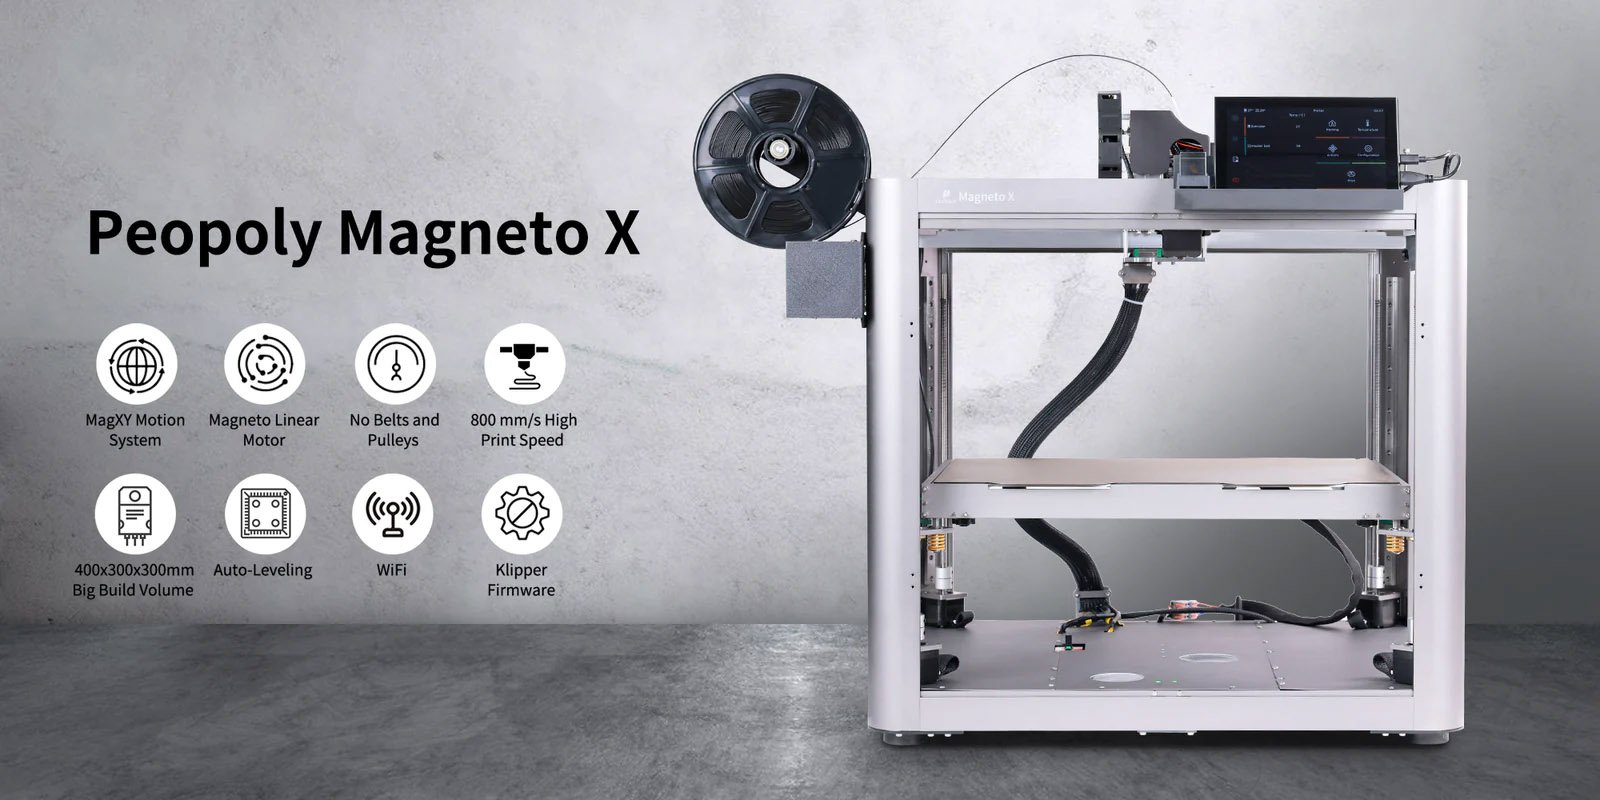 Peopoly Magneto X released - Magnets instead of belts